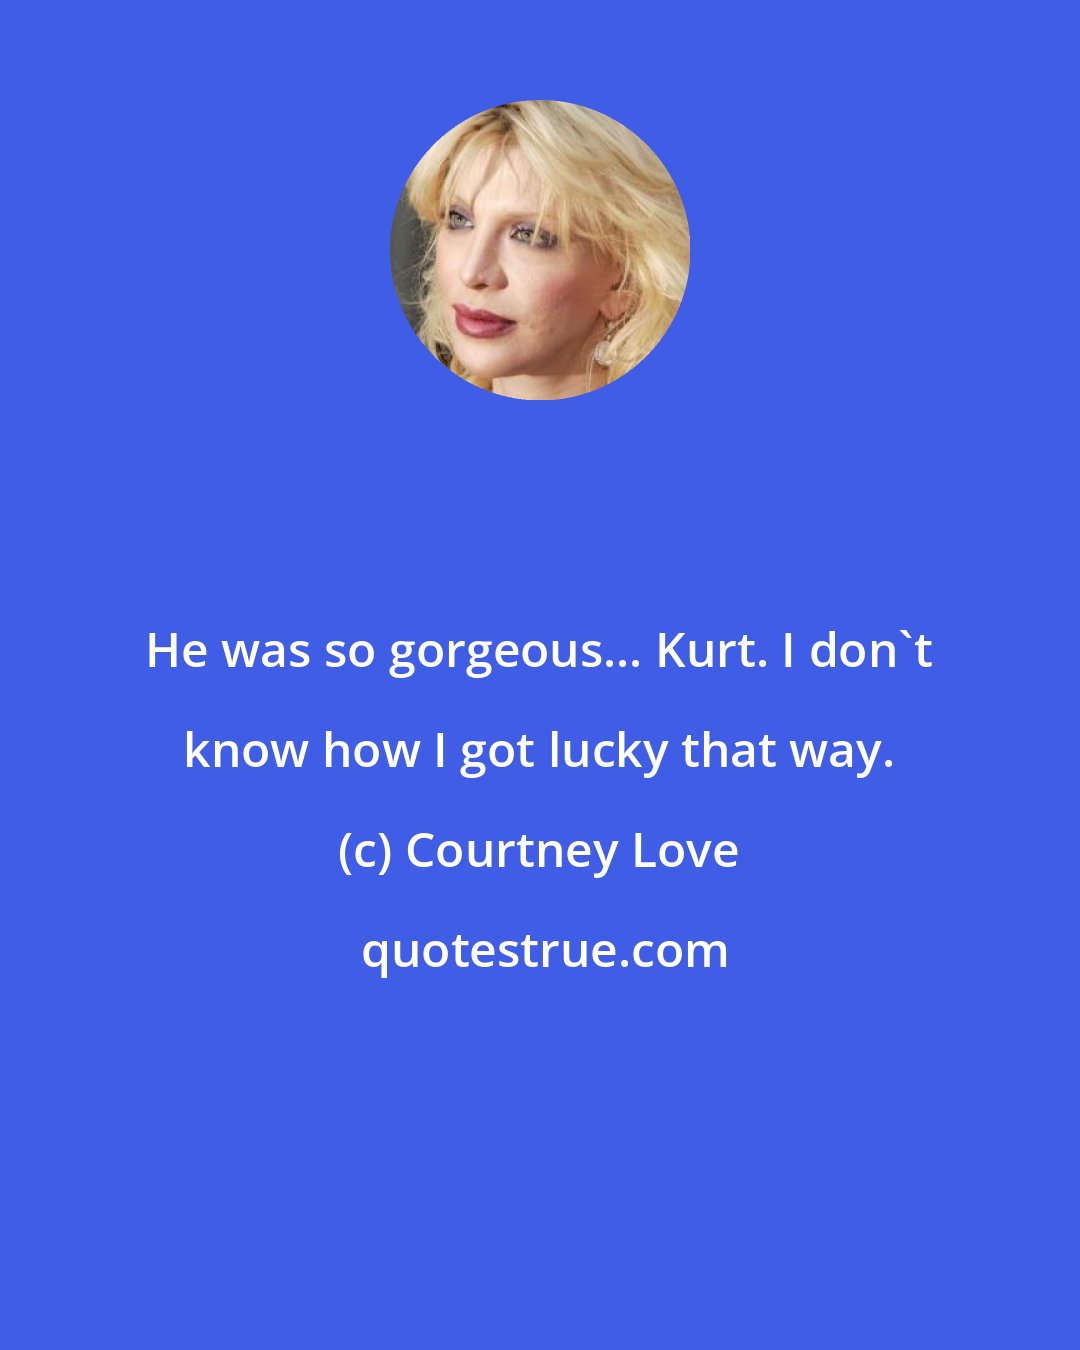 Courtney Love: He was so gorgeous... Kurt. I don't know how I got lucky that way.